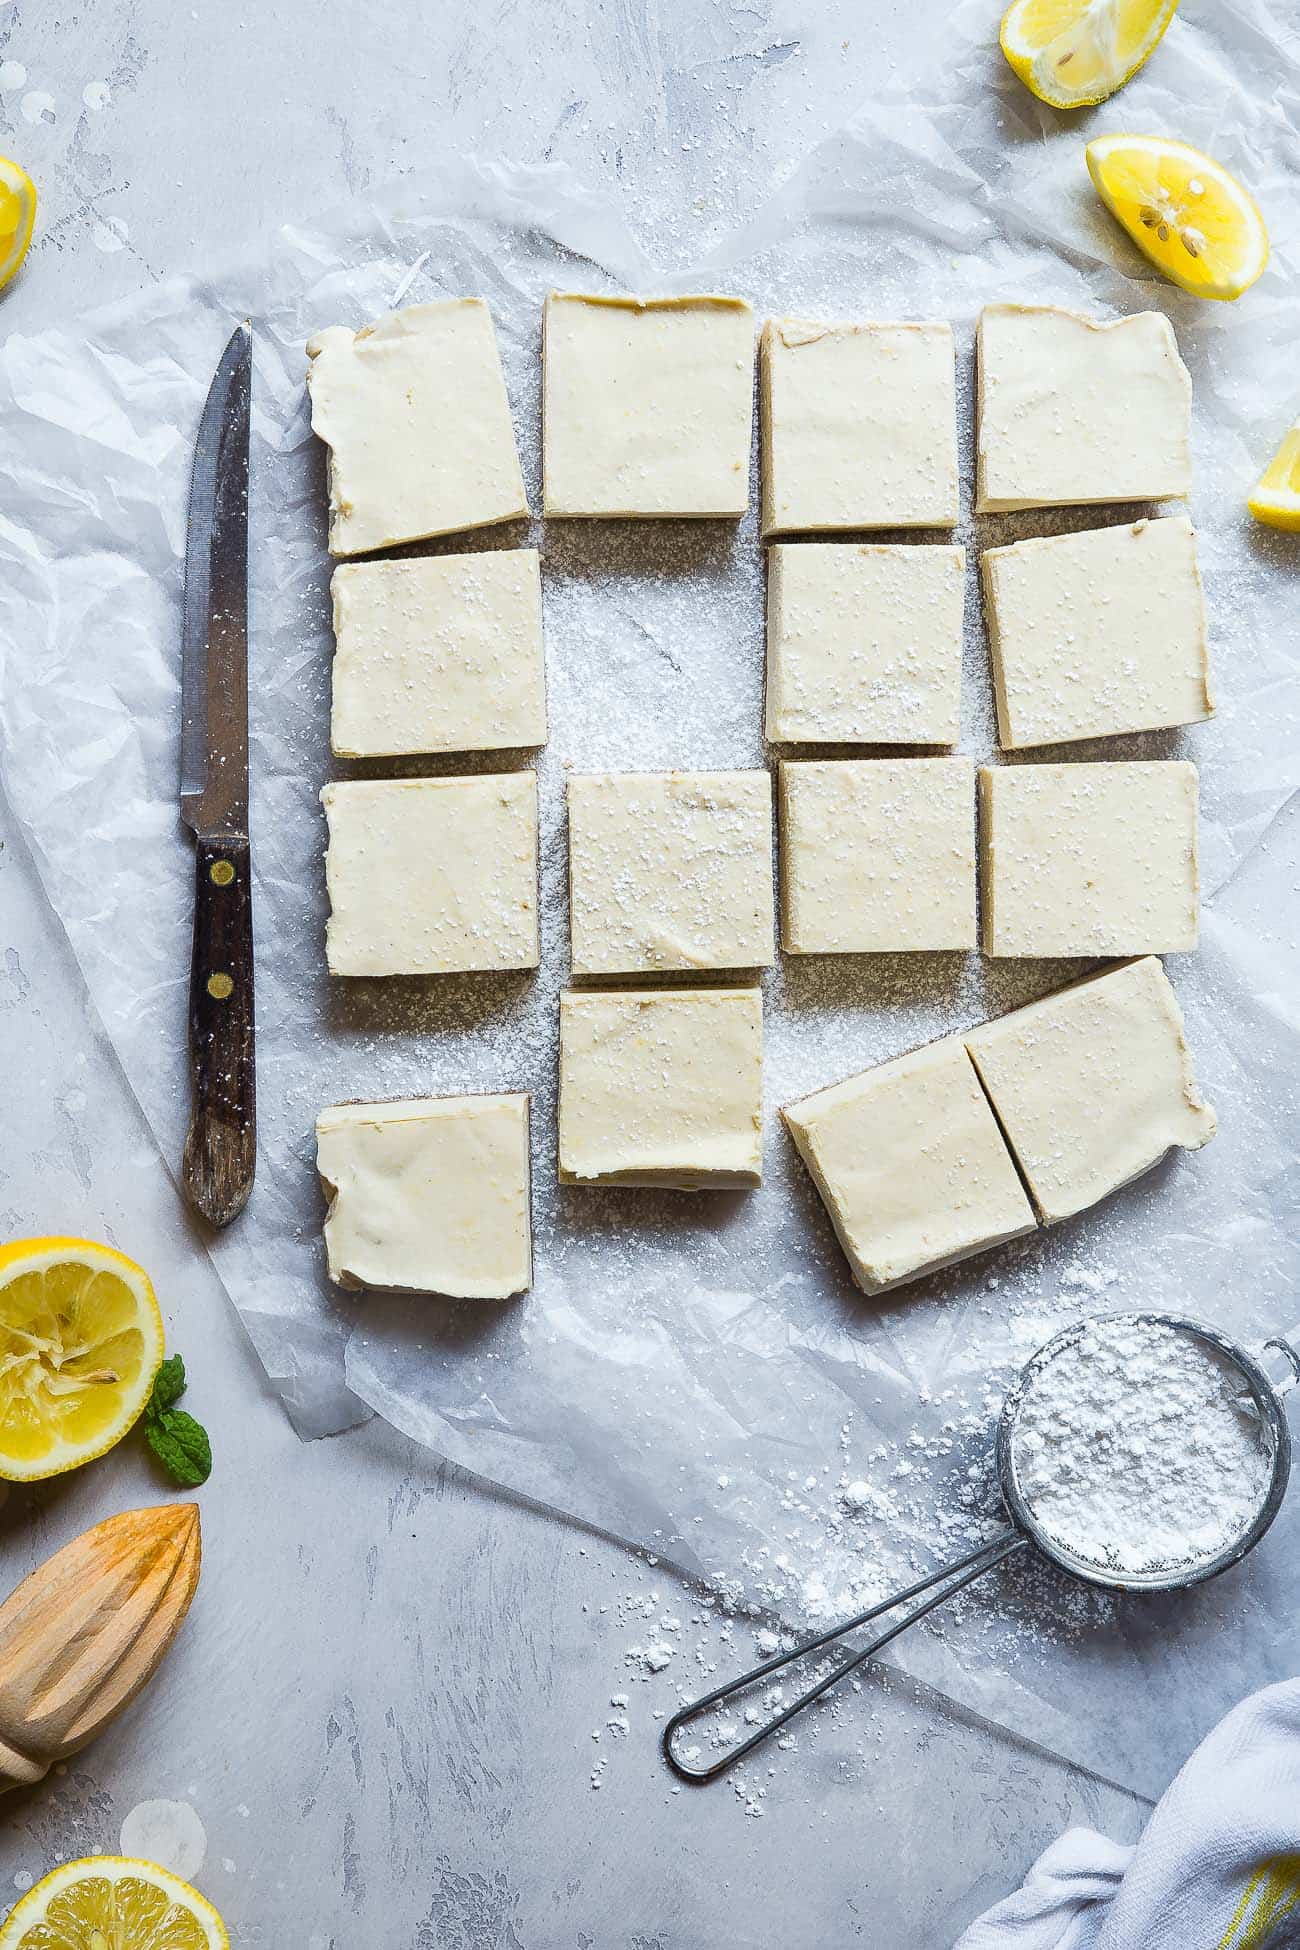 No Bake Paleo Lemon Bars - So creamy you won't believe they're gluten, grain, refined sugar and dairy free! They're only 4 ingredients, so easy to make and so delicious! | Foodfaithfitness.com | @FoodFaithFit